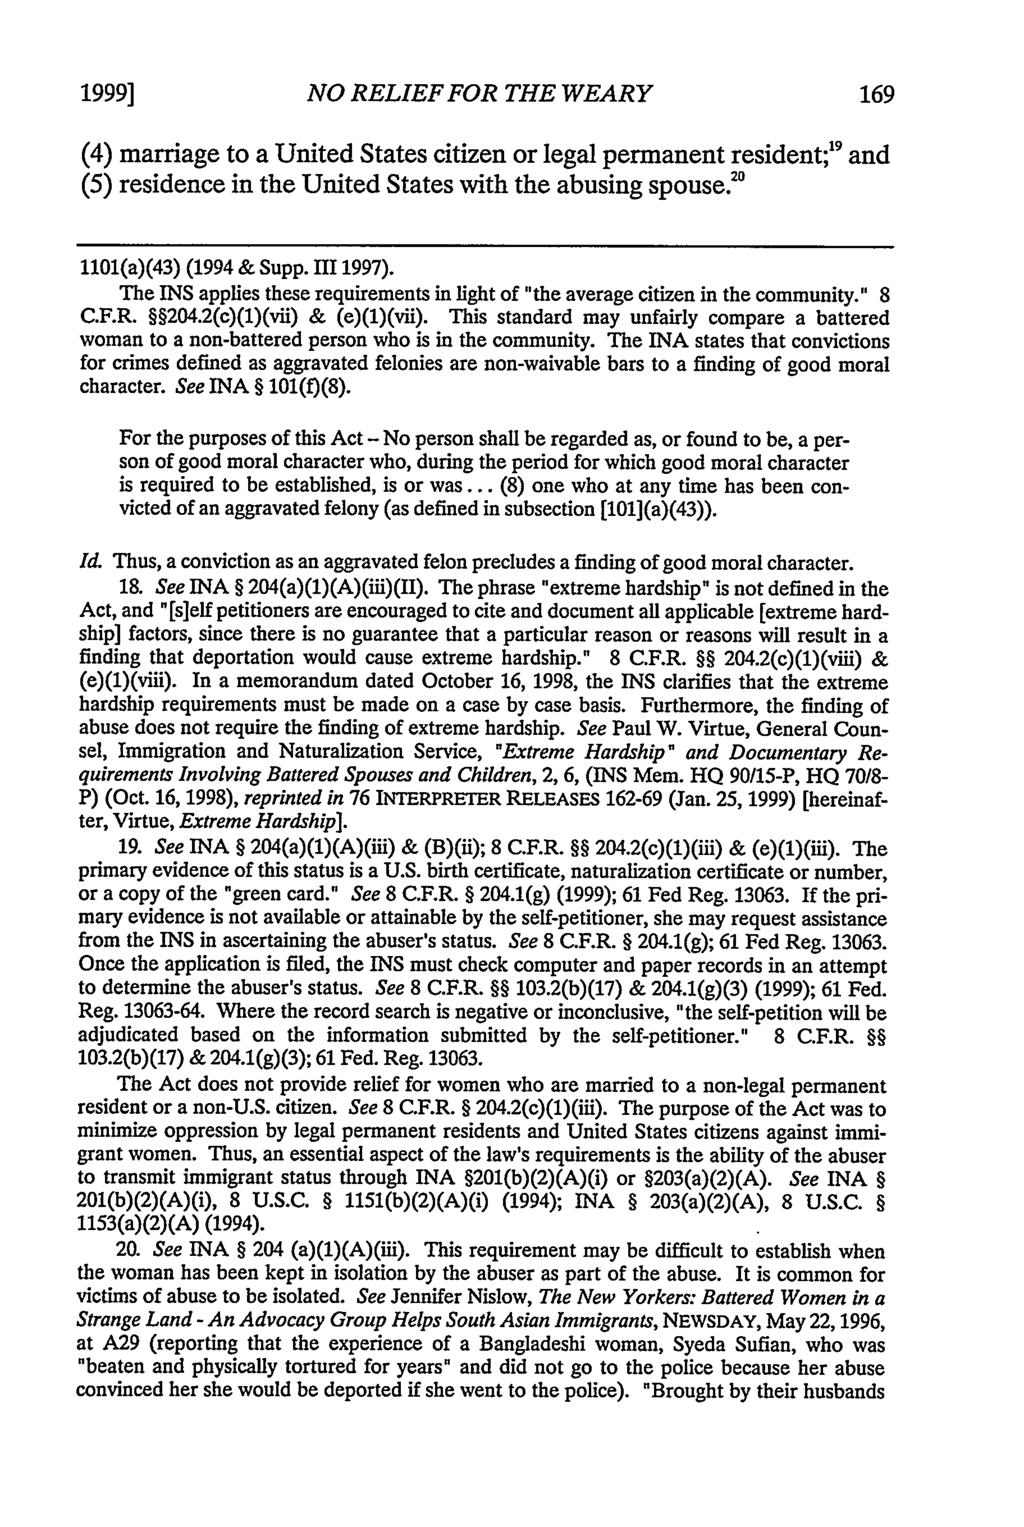 1999] NO RELIEF FOR THE WEARY (4) marriage to a United States citizen or legal permanent resident; 9 and (5) residence in the United States with the abusing spouse." 1101(a)(43) (1994 & Supp.